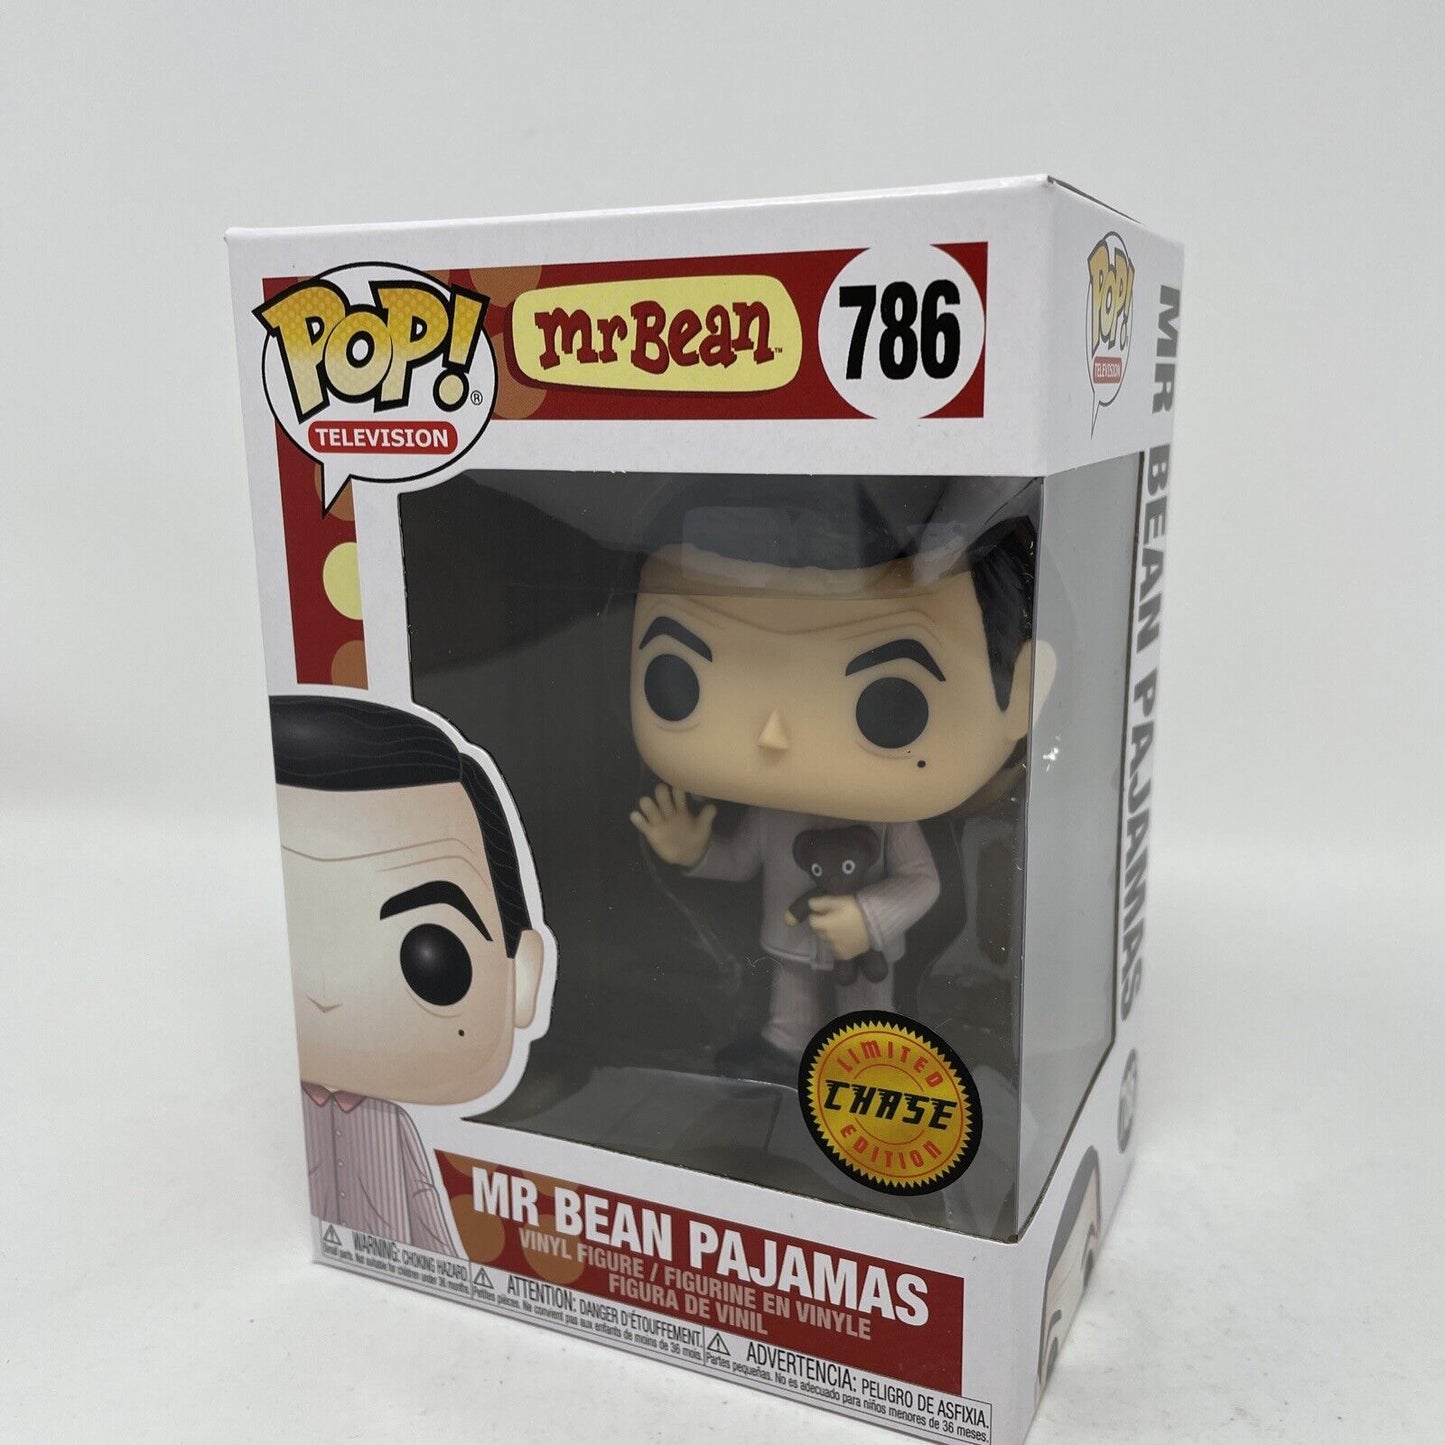 Funko - POP! Television - Mr. Bean - Mr. Bean Pajamas - Limited Edition Chase - #786